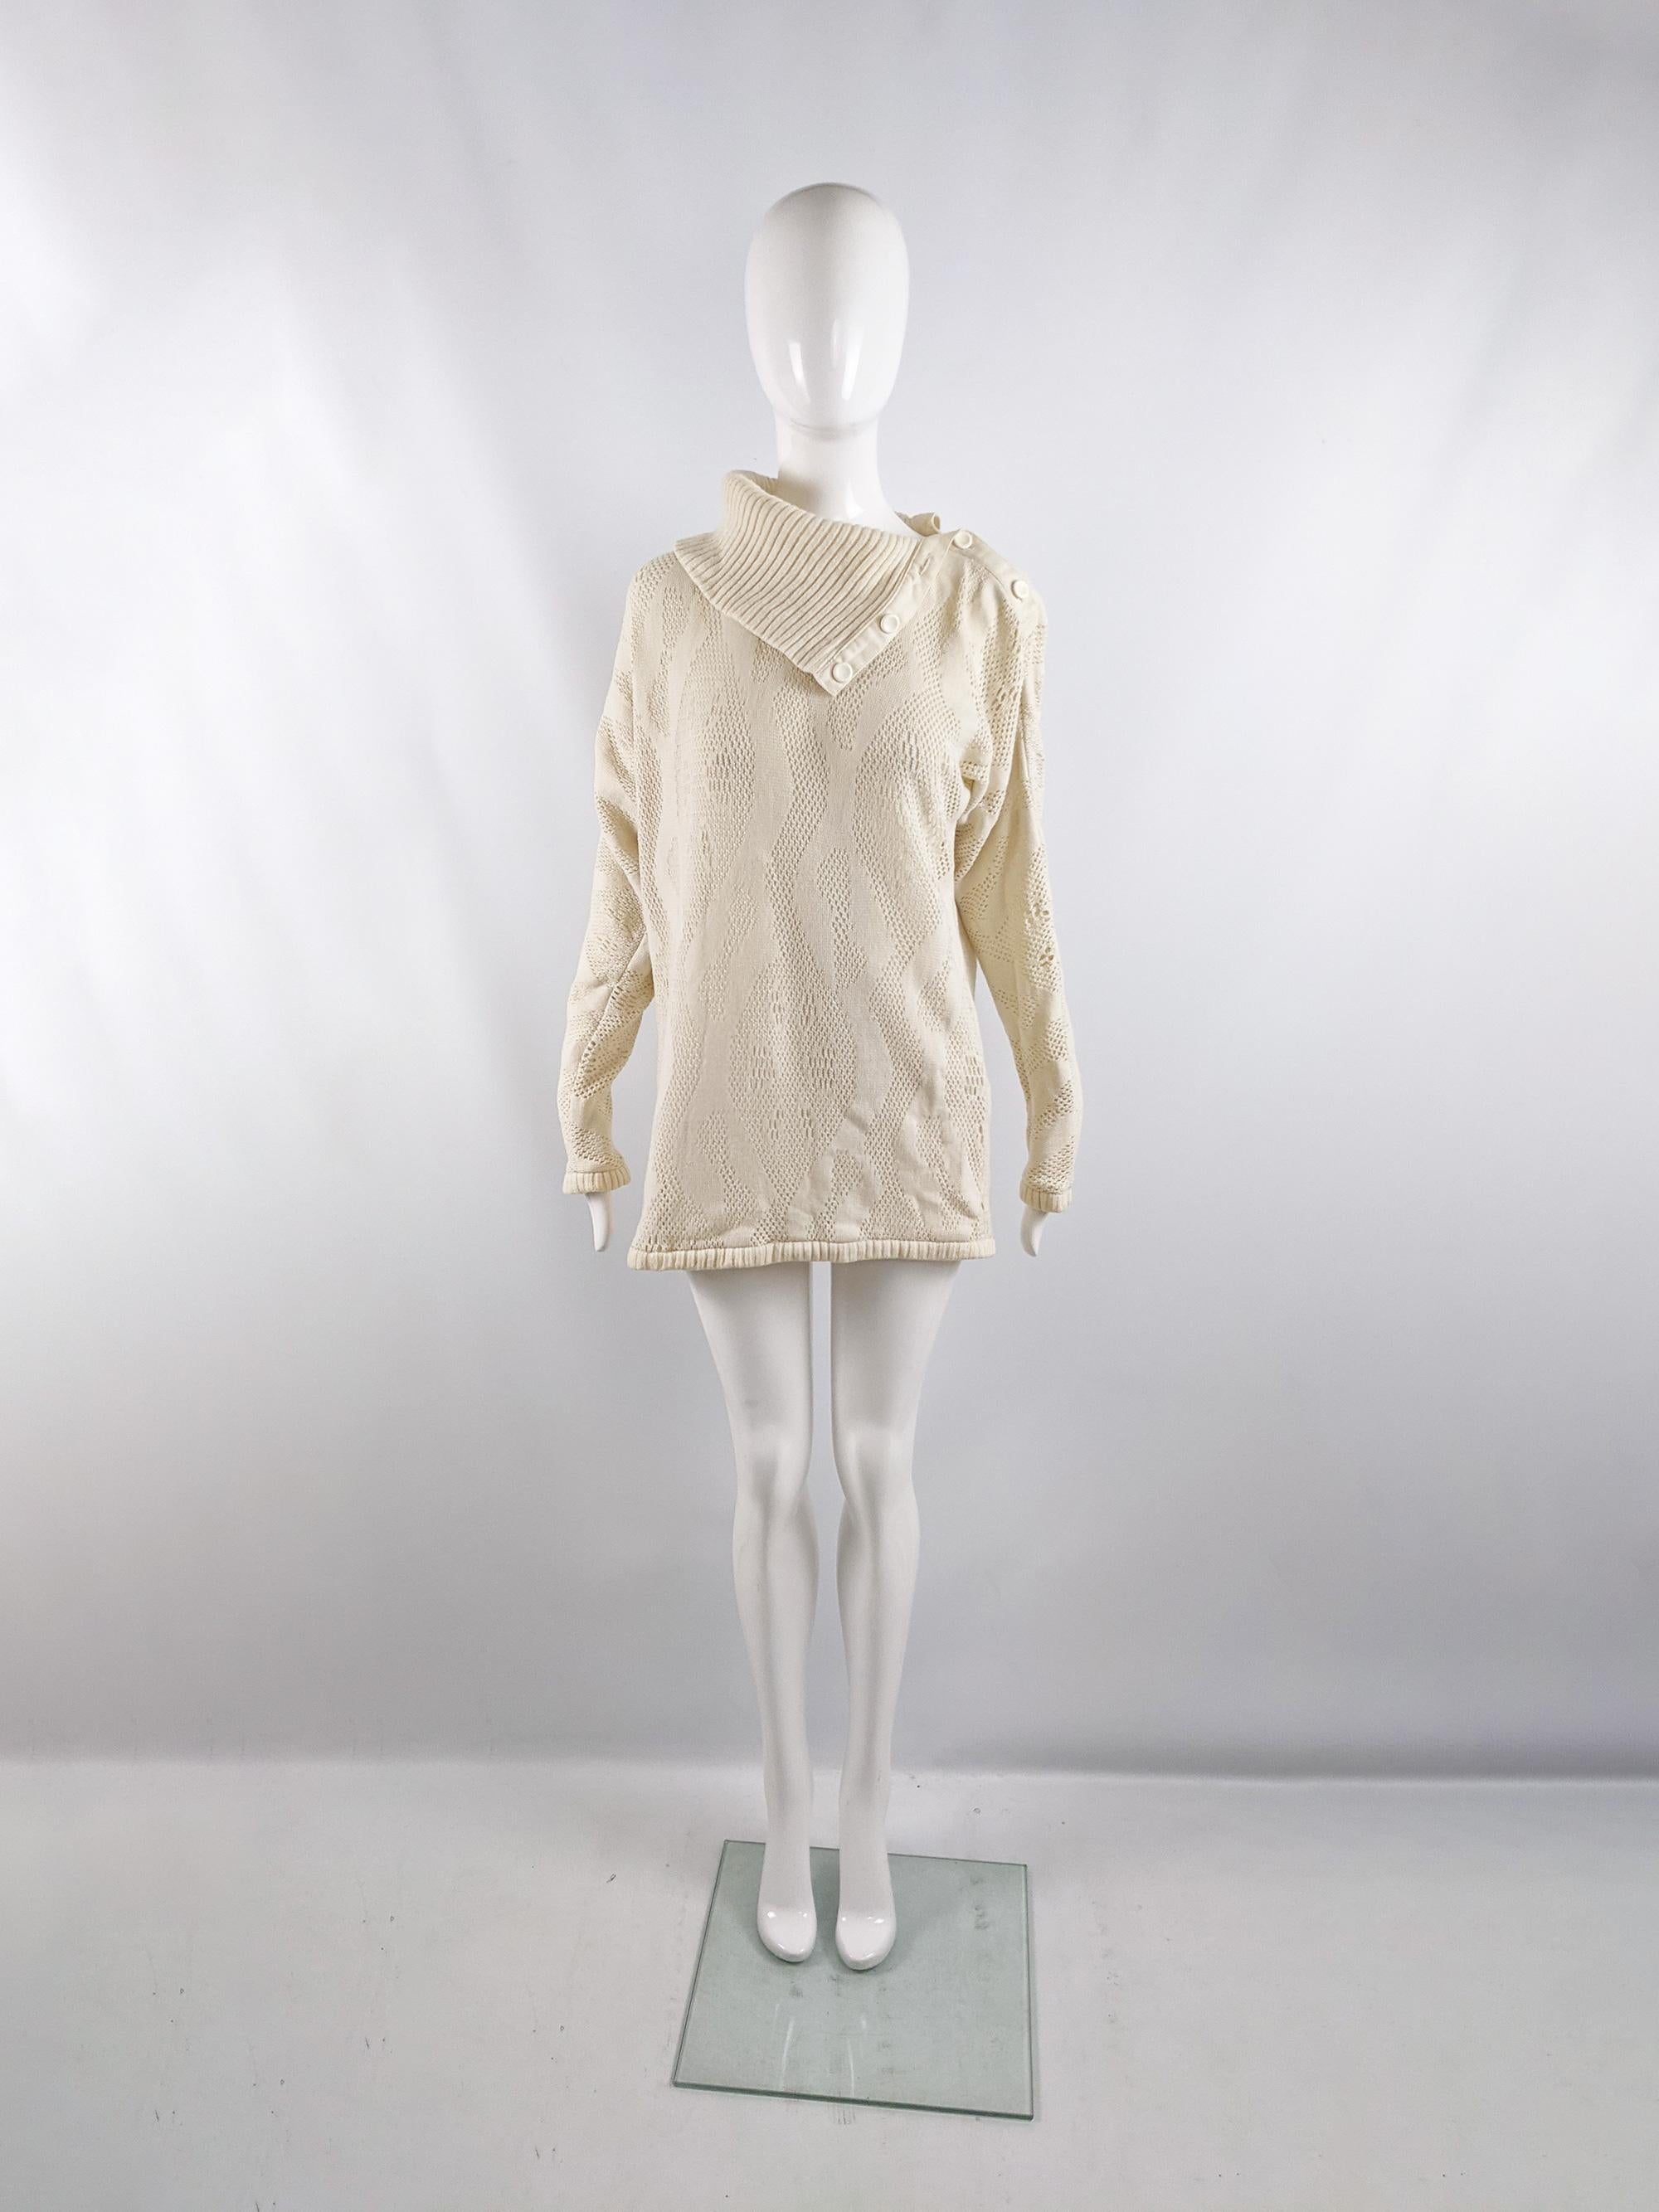 An incredible vintage womens jumper / sweater from the 80s by luxury French fashion designer, Bernard Perris. In a cream knit fabric with an amazing, experimental knitted technique, creating a wavy pattern with varying degrees of looseness which